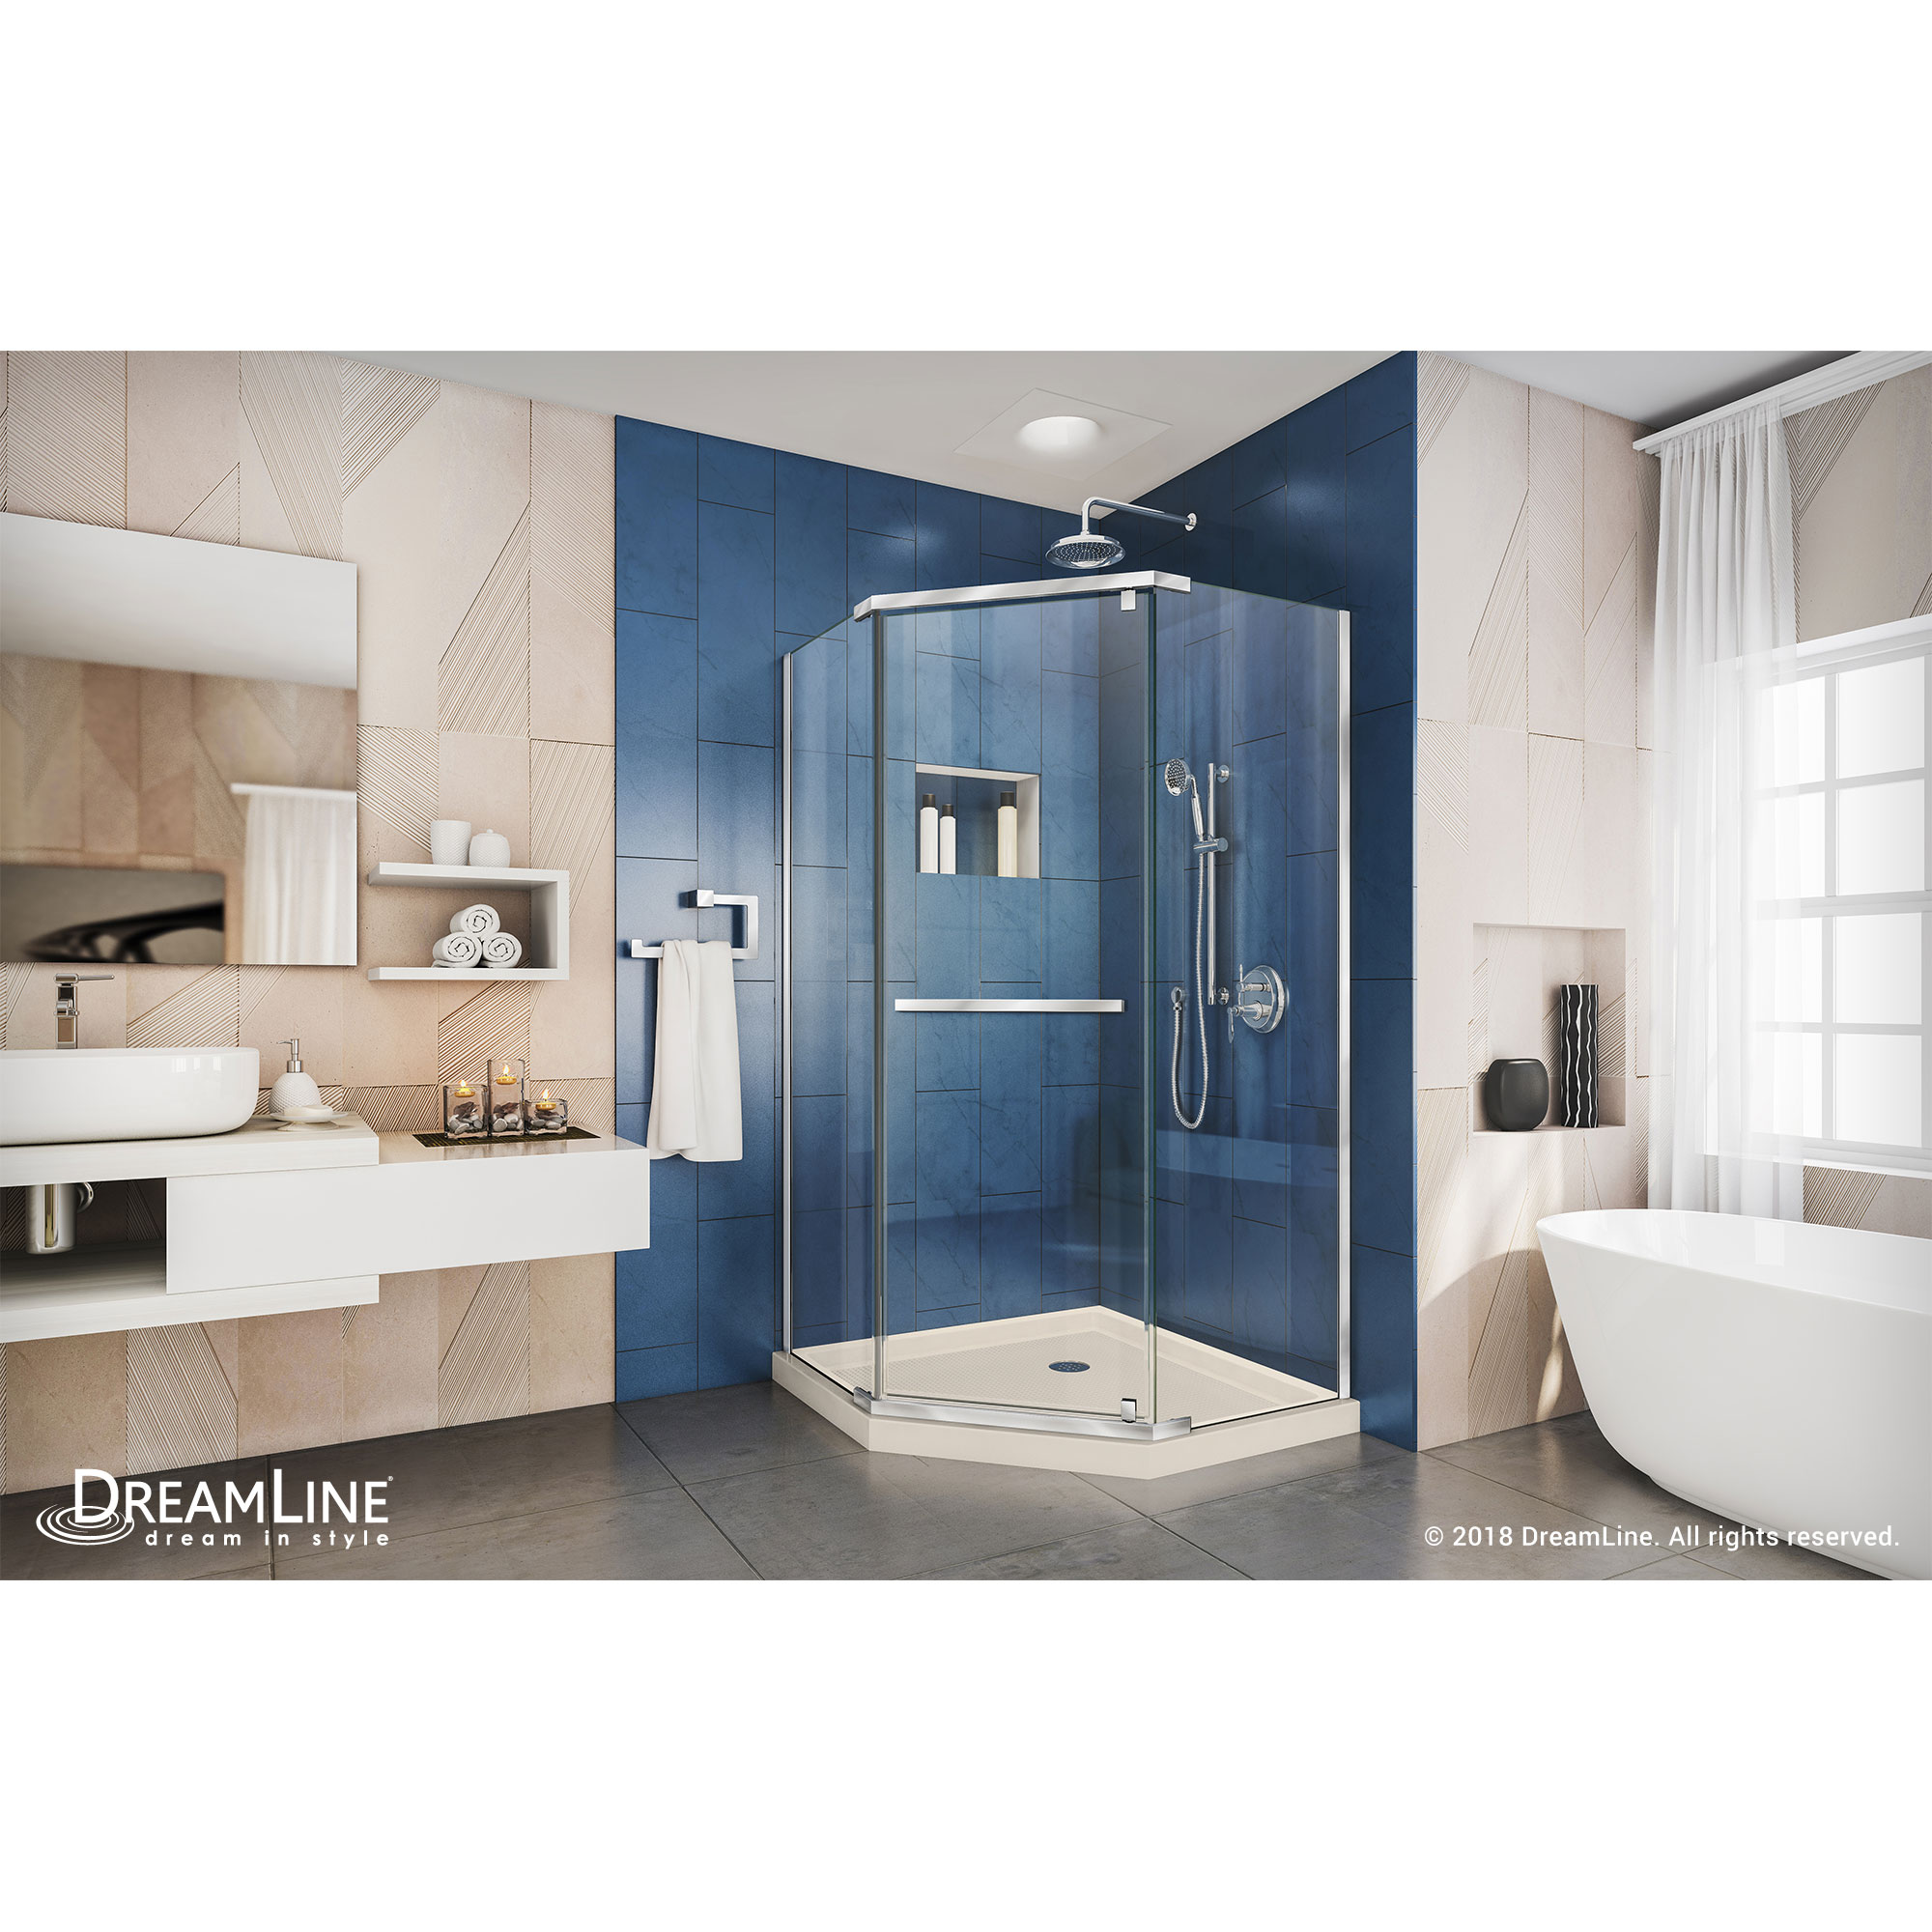 DreamLine Prism 40 in. D x 40 in. W x 74 3/4 H Pivot Shower Enclosure in Chrome and Corner Drain Biscuit Base Kit